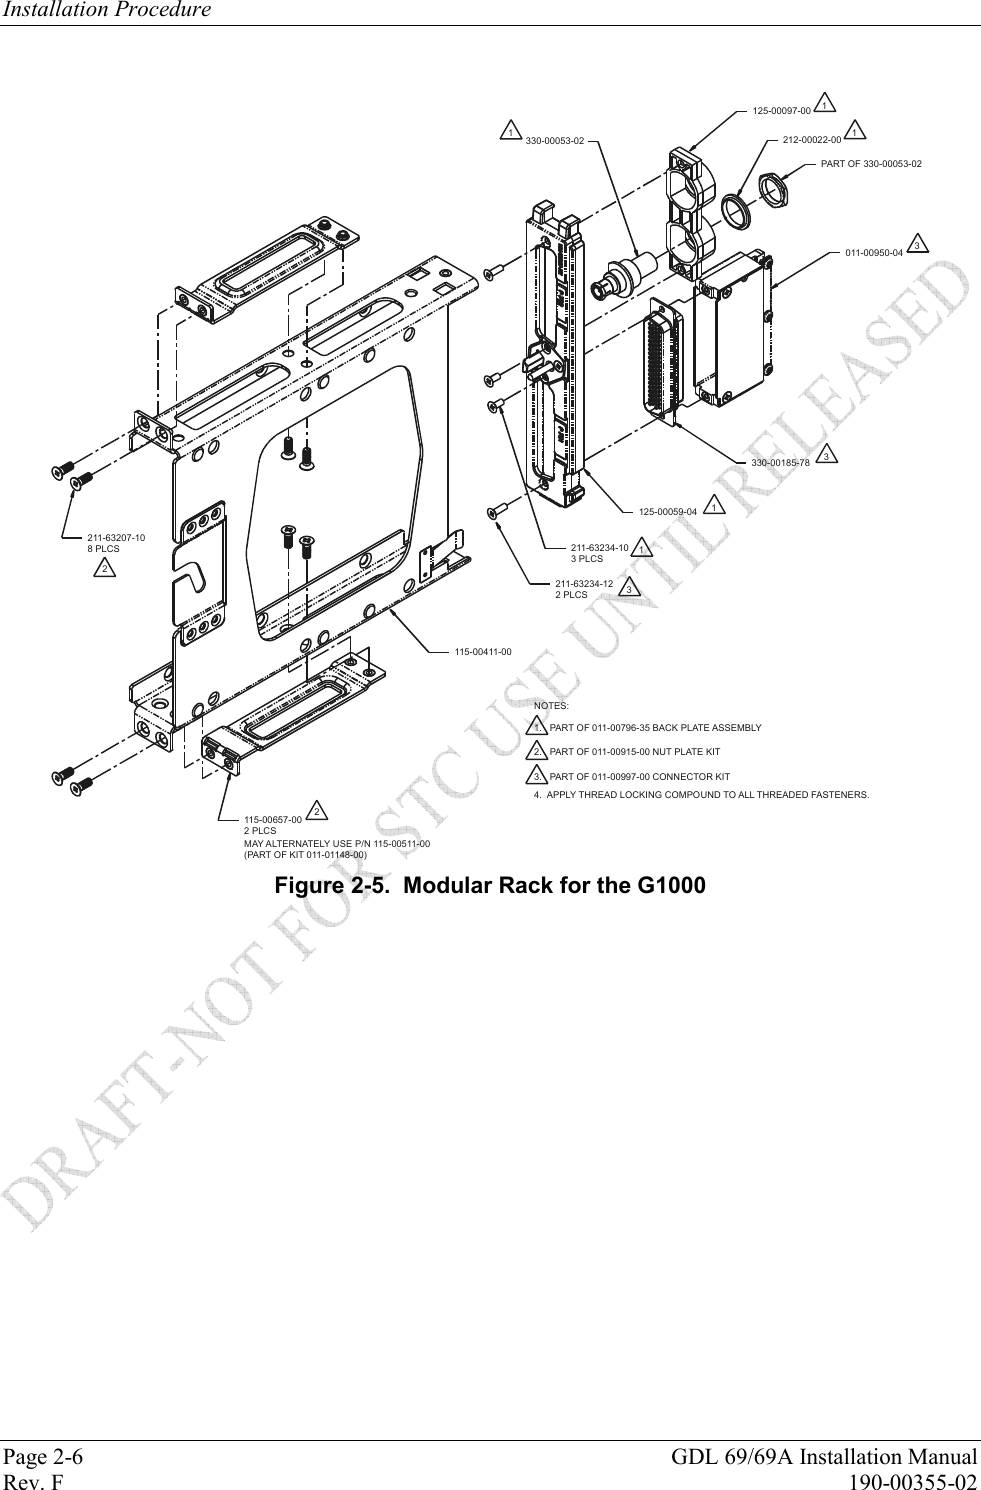 Installation Procedure Page 2-6  GDL 69/69A Installation Manual Rev. F  190-00355-02  2MAY ALTERNATELY USE P/N 115-00511-00(PART OF KIT 011-01148-00)011-00950-04330-00185-78211-63207-108 PLCS2 PLCS115-00657-004.  APPLY THREAD LOCKING COMPOUND TO ALL THREADED FASTENERS.2.   PART OF 011-00915-00 NUT PLATE KIT1.   PART OF 011-00796-35 BACK PLATE ASSEMBLYNOTES:115-00411-00125-00059-0421211-63234-12212-00022-00125-00097-00330-00053-02111PART OF 330-00053-02331211-63234-103.   PART OF 011-00997-00 CONNECTOR KIT3 PLCS32 PLCS Figure 2-5.  Modular Rack for the G1000 